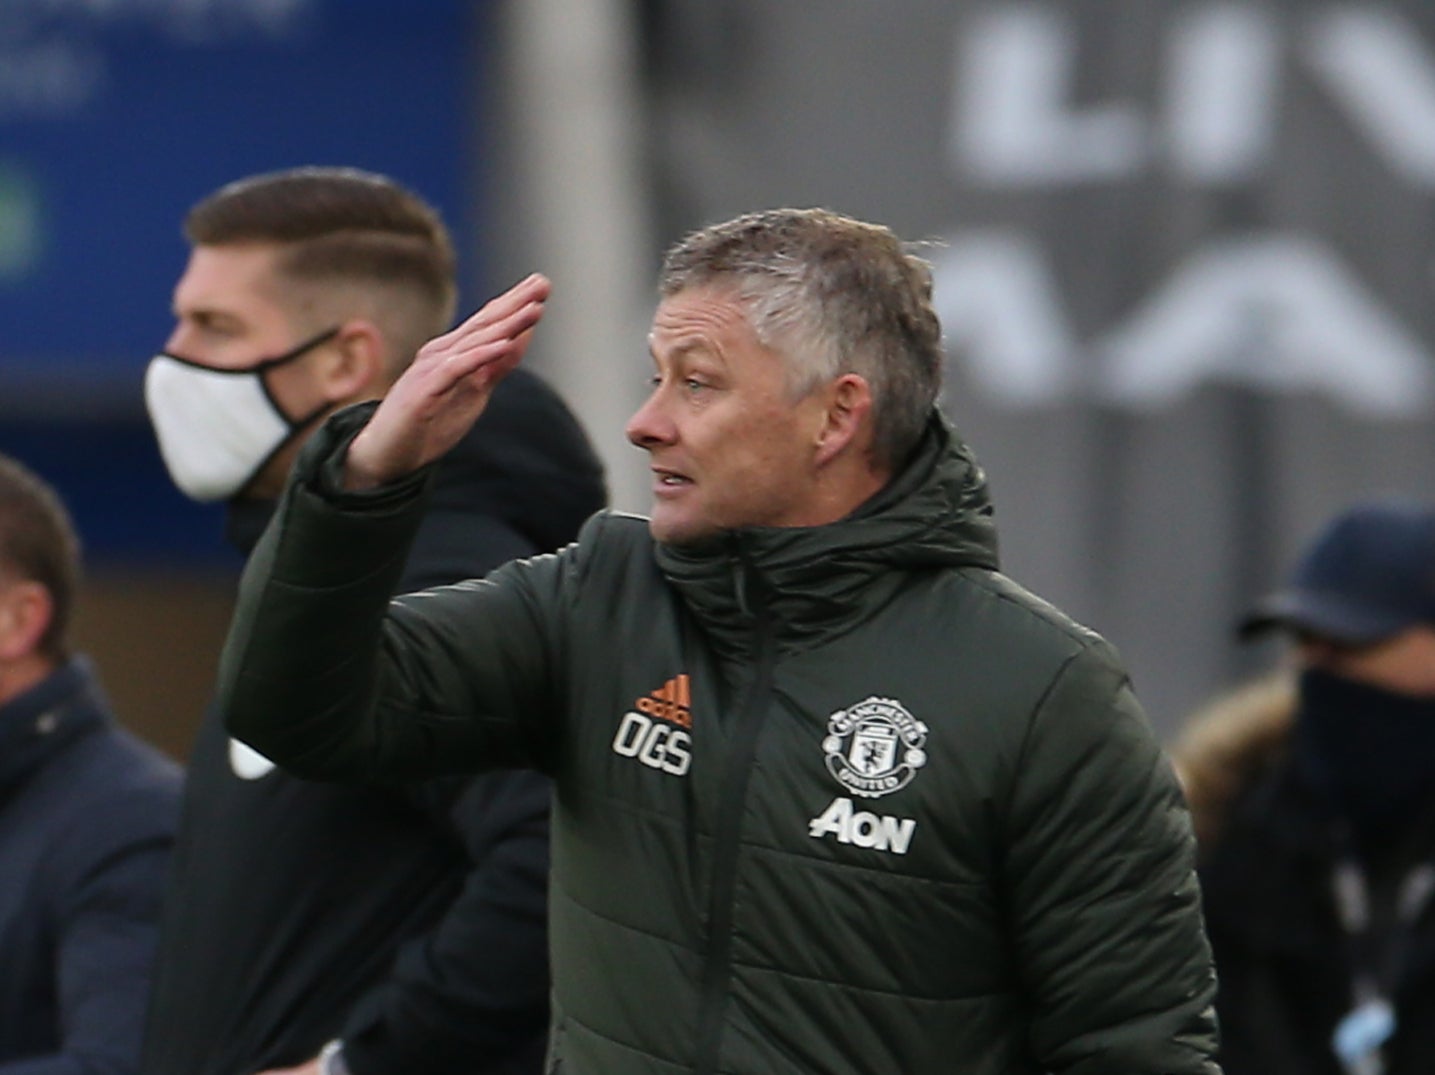 Ole Gunnar Solskjaer looks on as his Man United team draw against Leicester